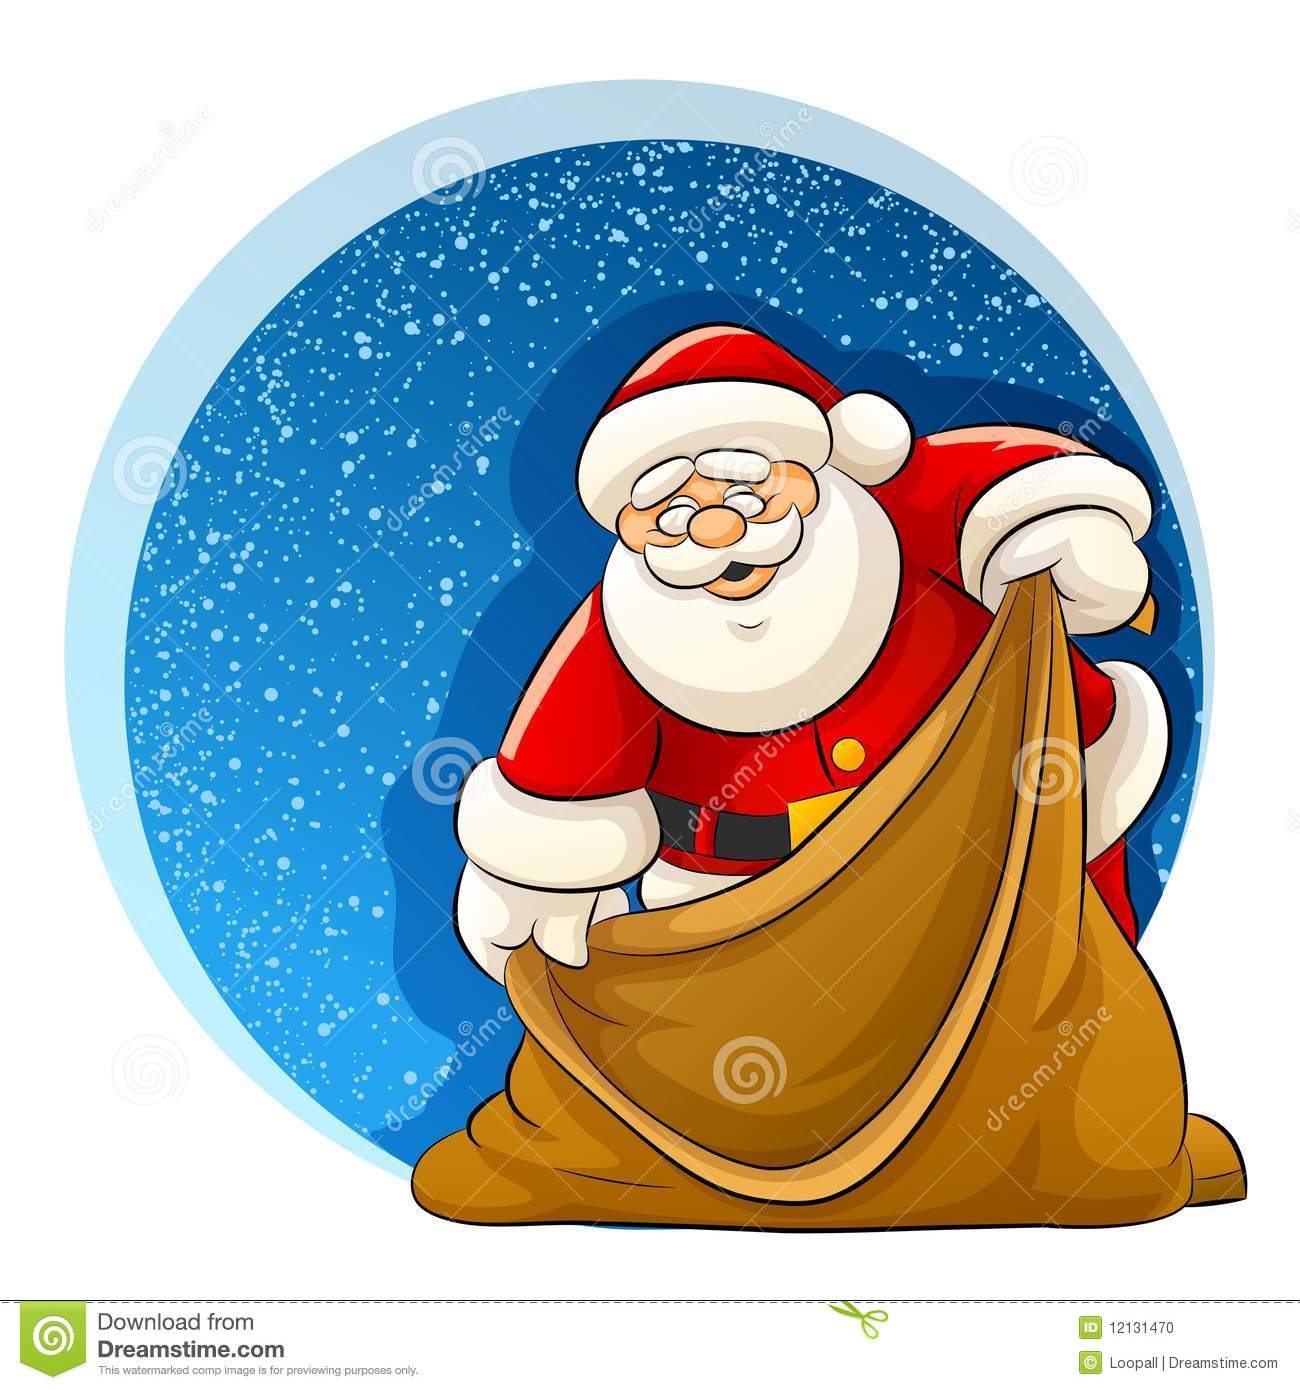 Santa Claus With Empty Sack For Christmas Gifts Stock Photo   Image    